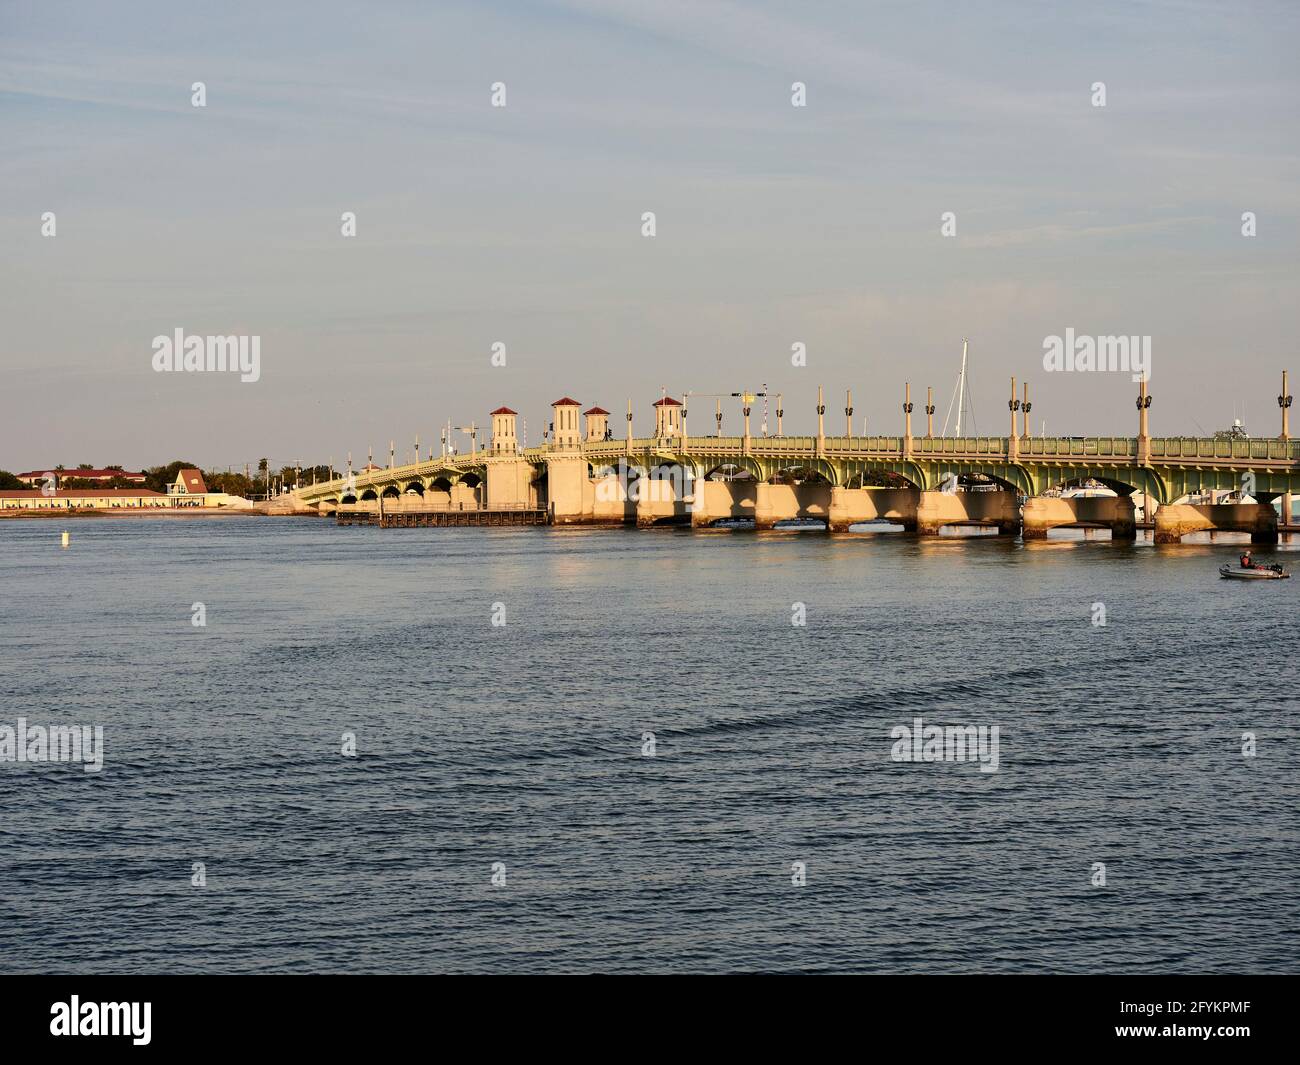 The Bridge of Lions or Lions Bridge, is a double-leaf bascule bridge that spans the Intracoastal Waterway,  Matanzas Bay, St. Augustine, Florida, USA. Stock Photo